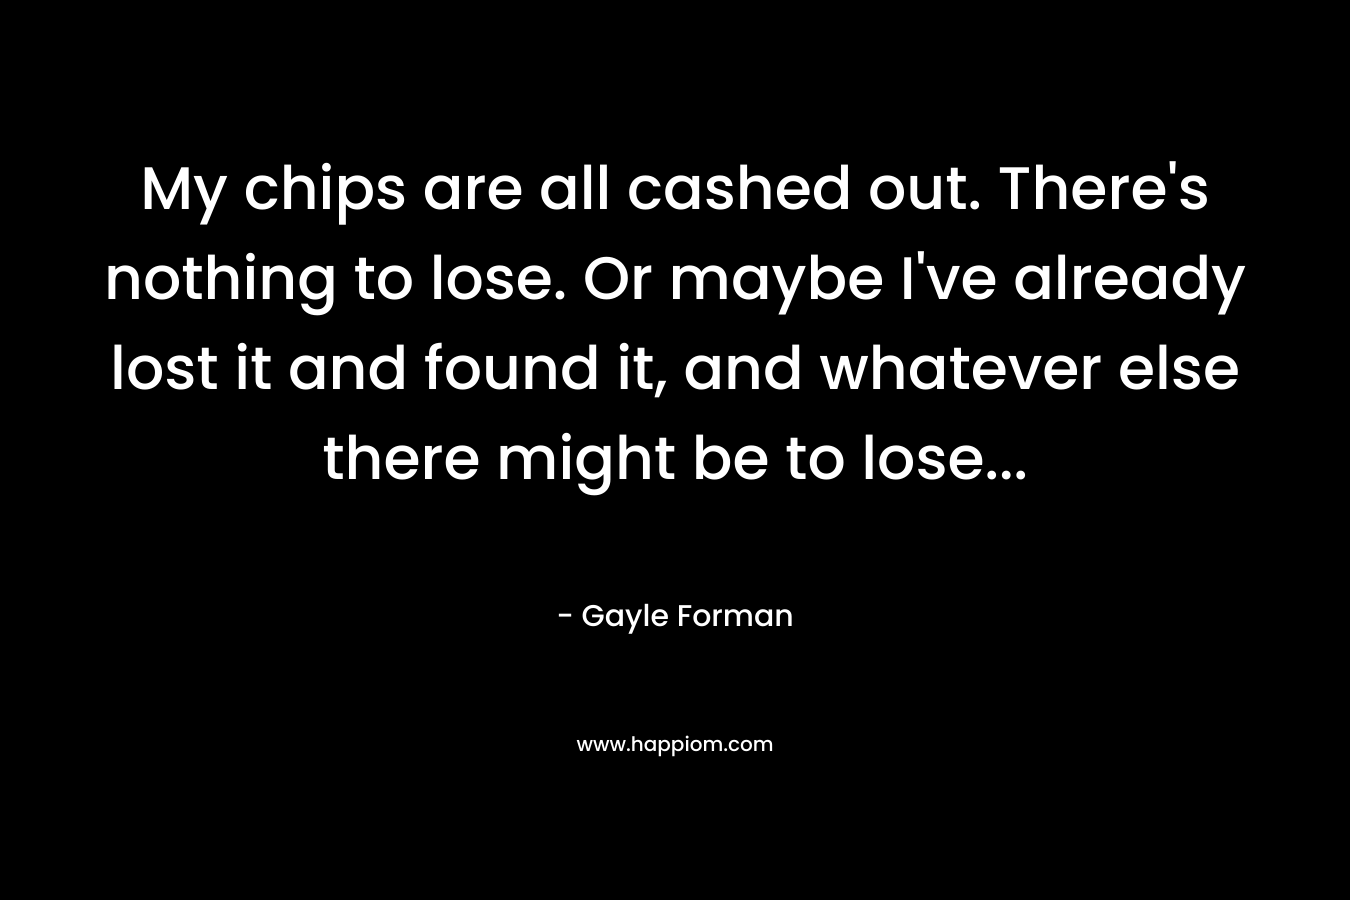 My chips are all cashed out. There's nothing to lose. Or maybe I've already lost it and found it, and whatever else there might be to lose...